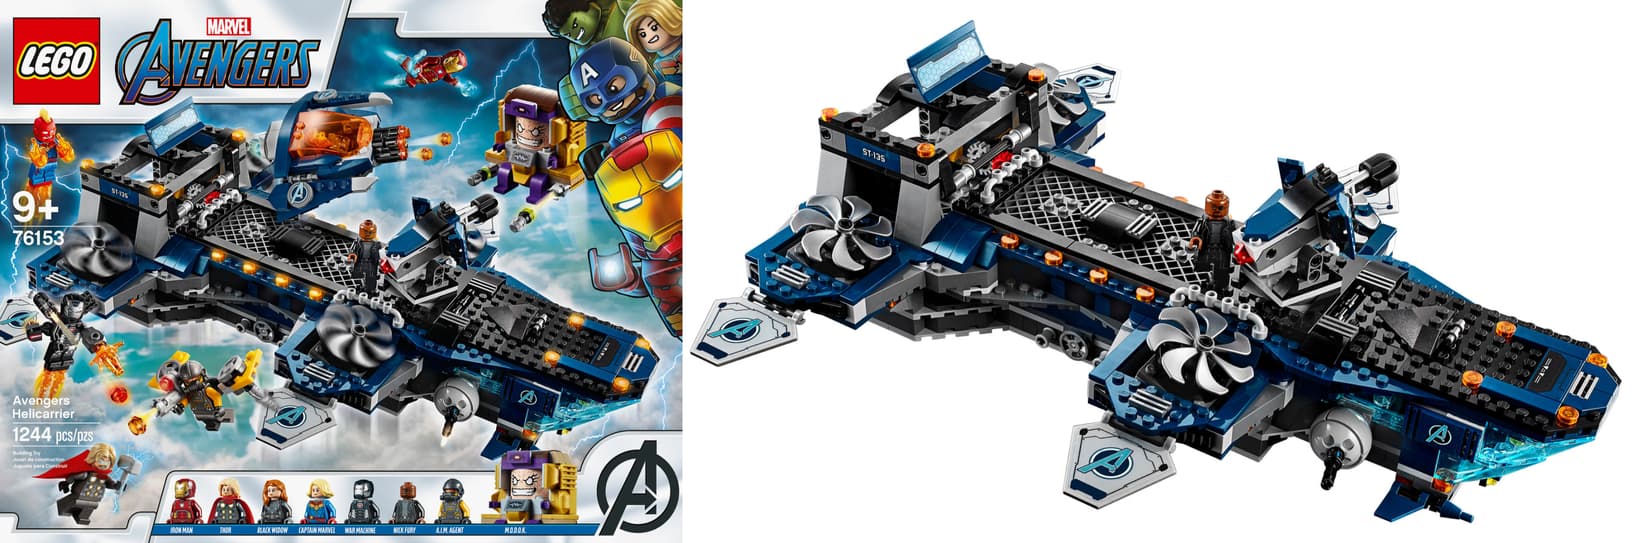 LEGO MARVEL AVENGERS A.I.M.AGENT MINIFIGURE BRAND NEW FROM HELICARRIER SET 76153